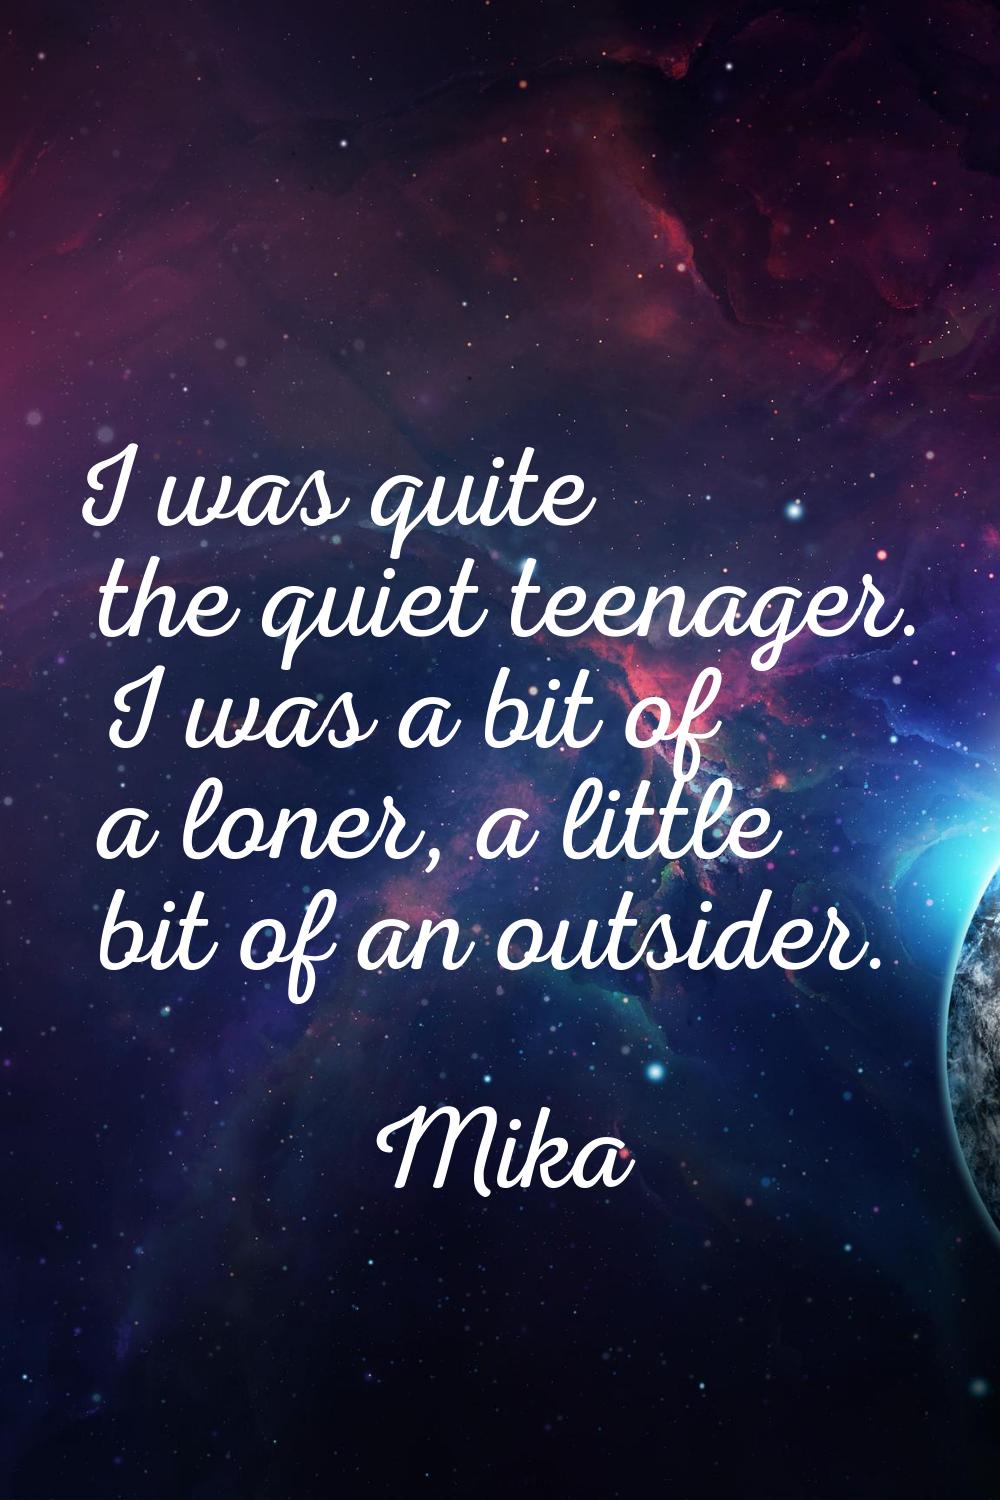 I was quite the quiet teenager. I was a bit of a loner, a little bit of an outsider.